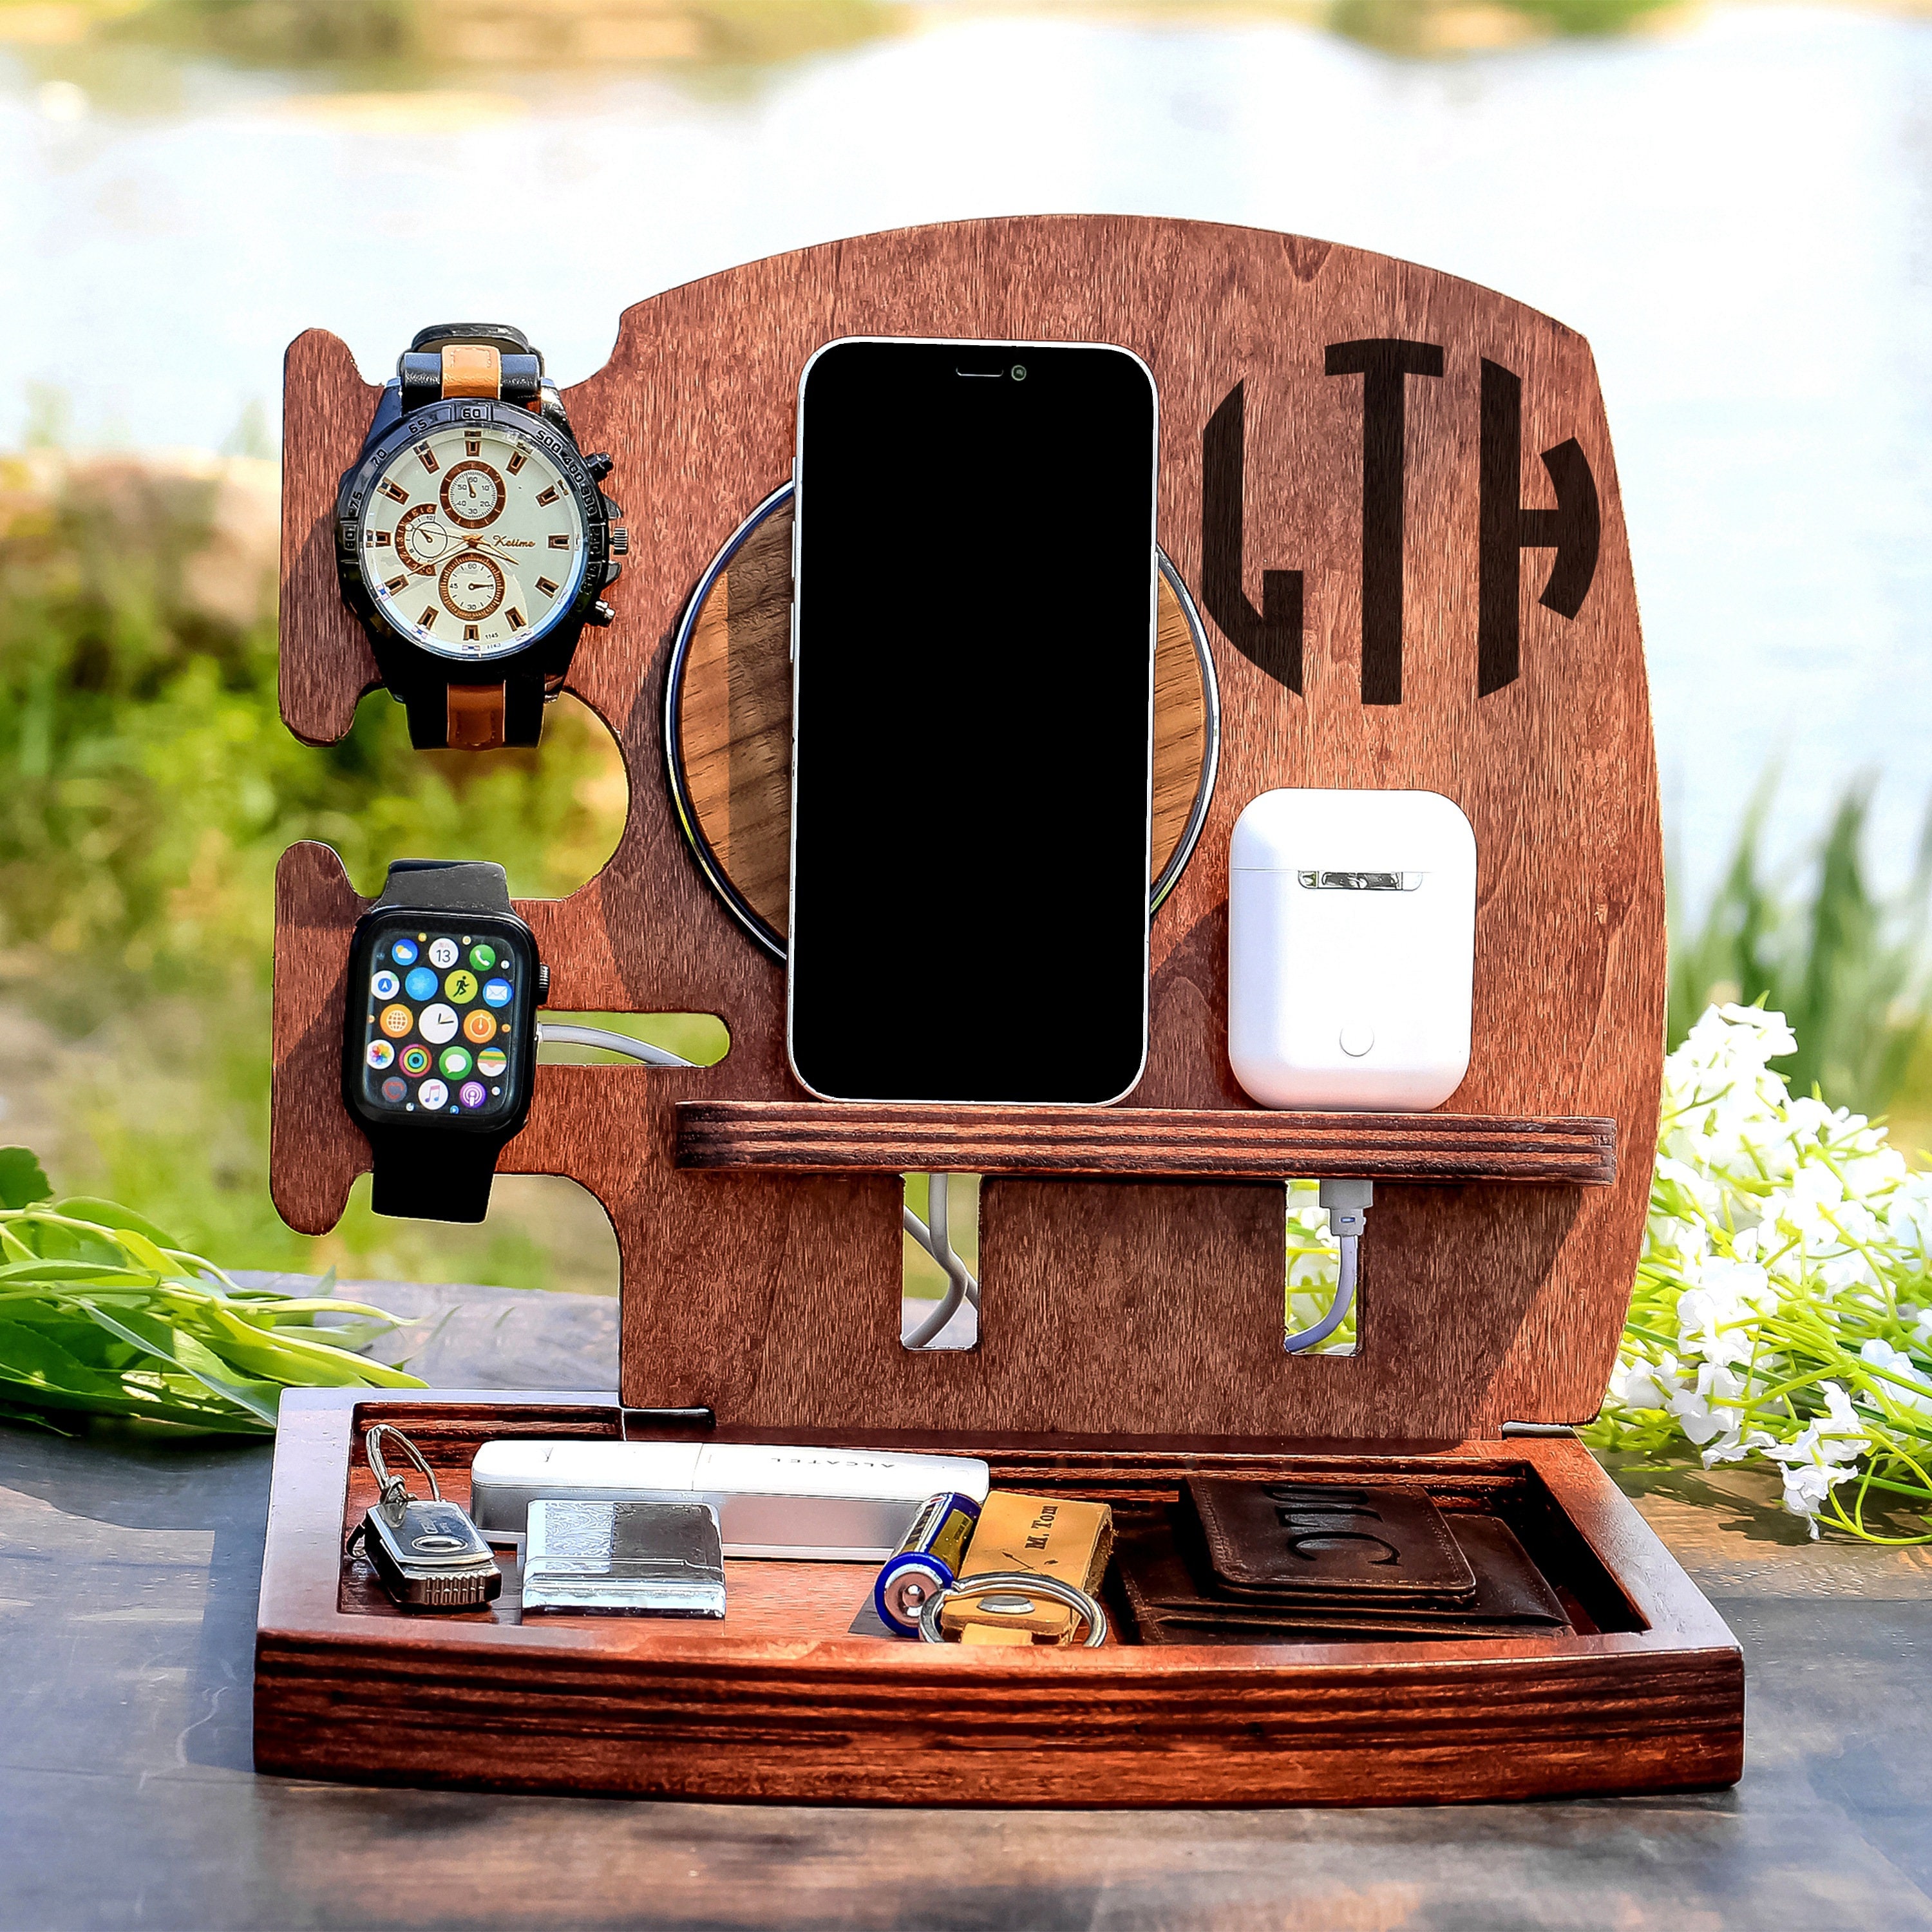 Wood Phone Docking Station Nightstand Organizer Gifts for Valentines Day  Gift for Men Women Wooden Bedside Phone Desk Stand - AliExpress